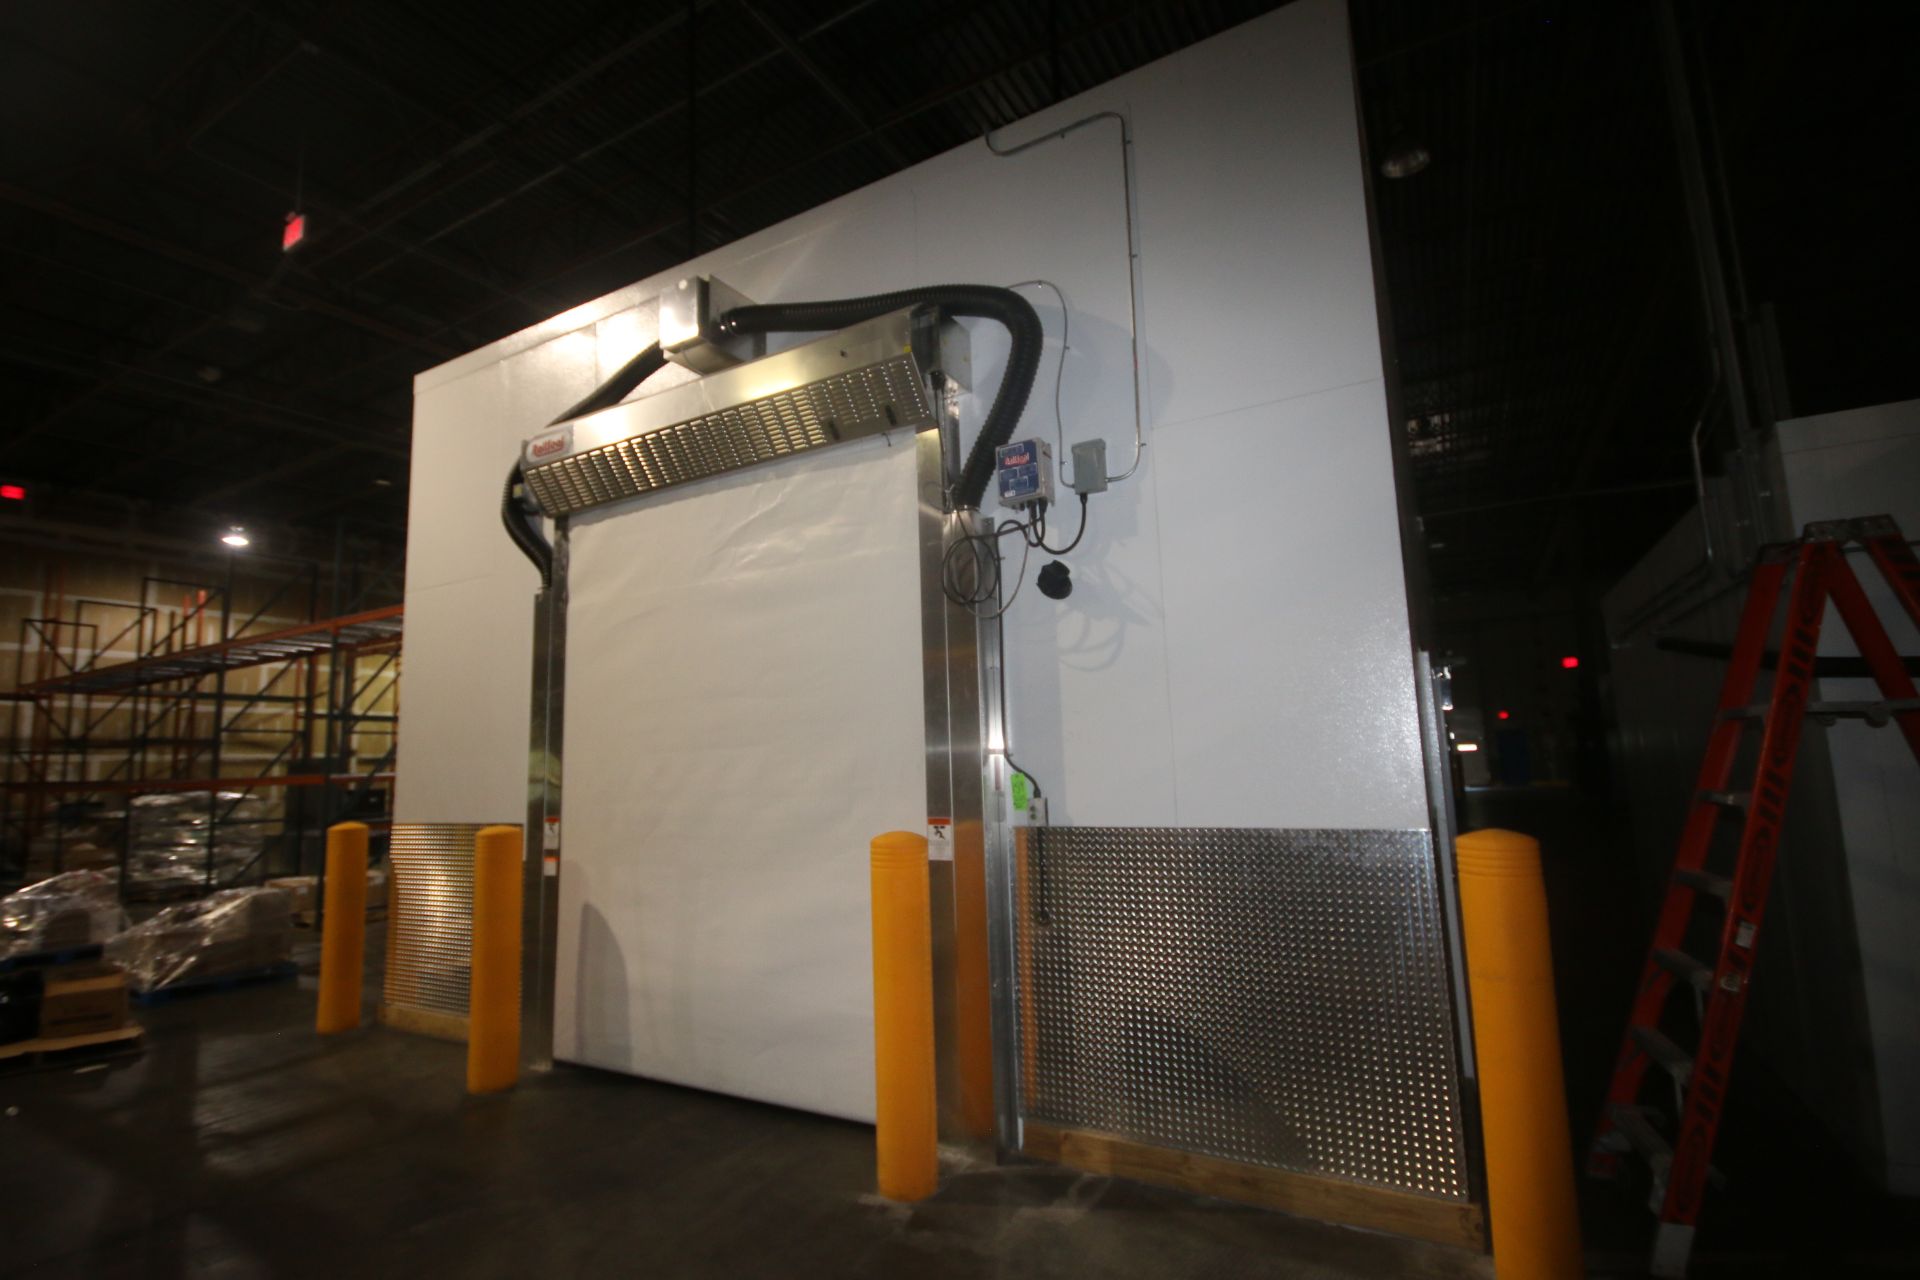 2018 RollSeal Air Tight Drive-Thru Modular Room, Overall Dims.: Aprox. 88' L x 20' W x 190" Tall, - Image 18 of 24